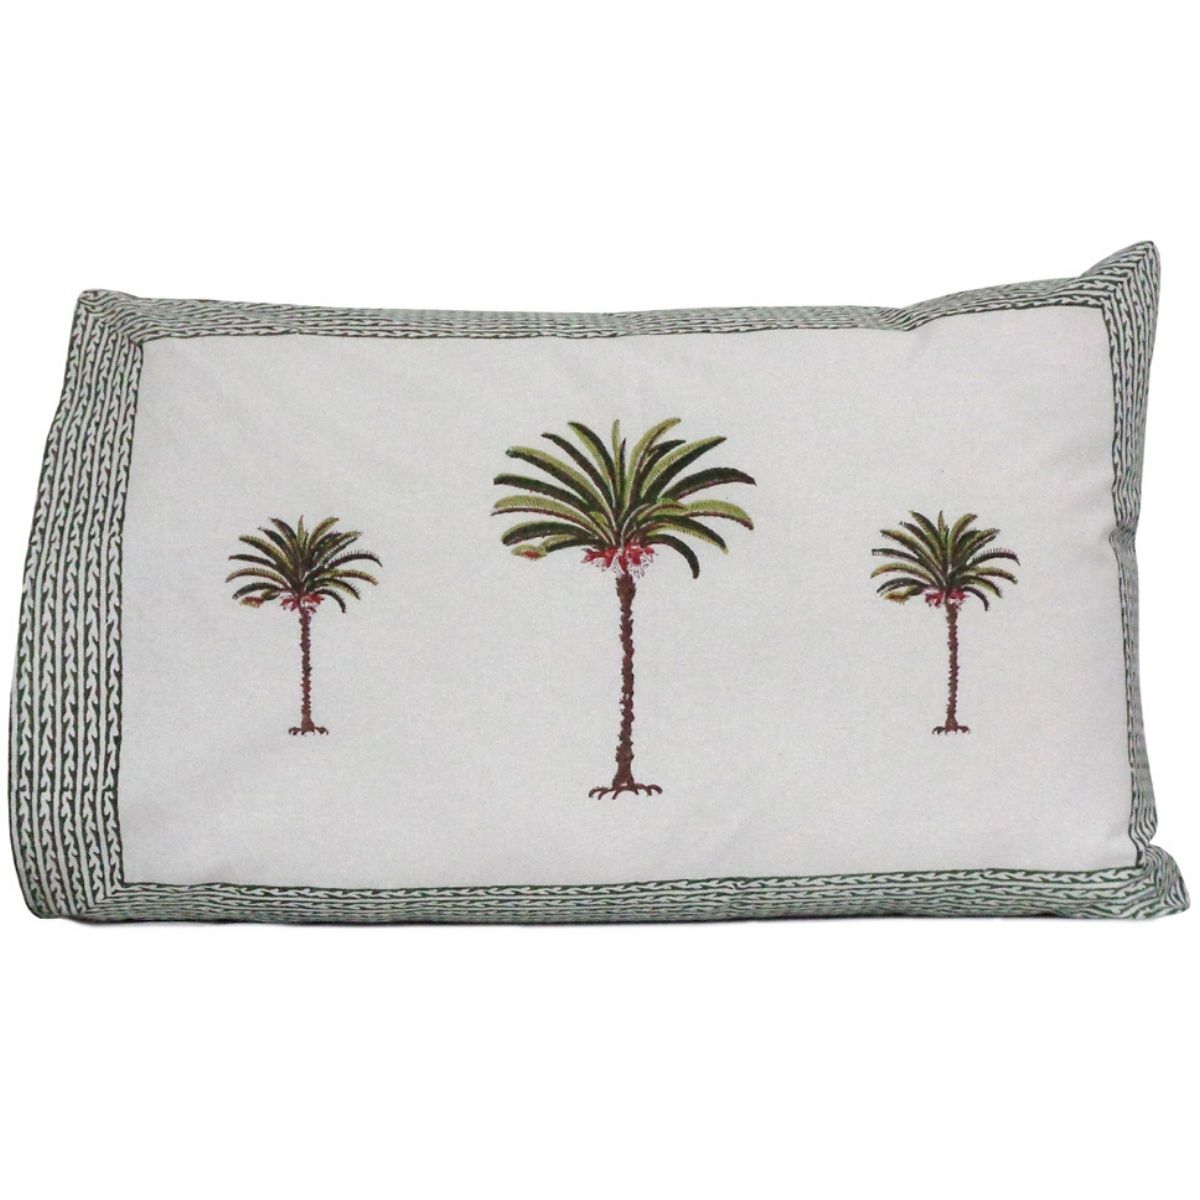 Palm tree pillow cases- set of 2 -Green